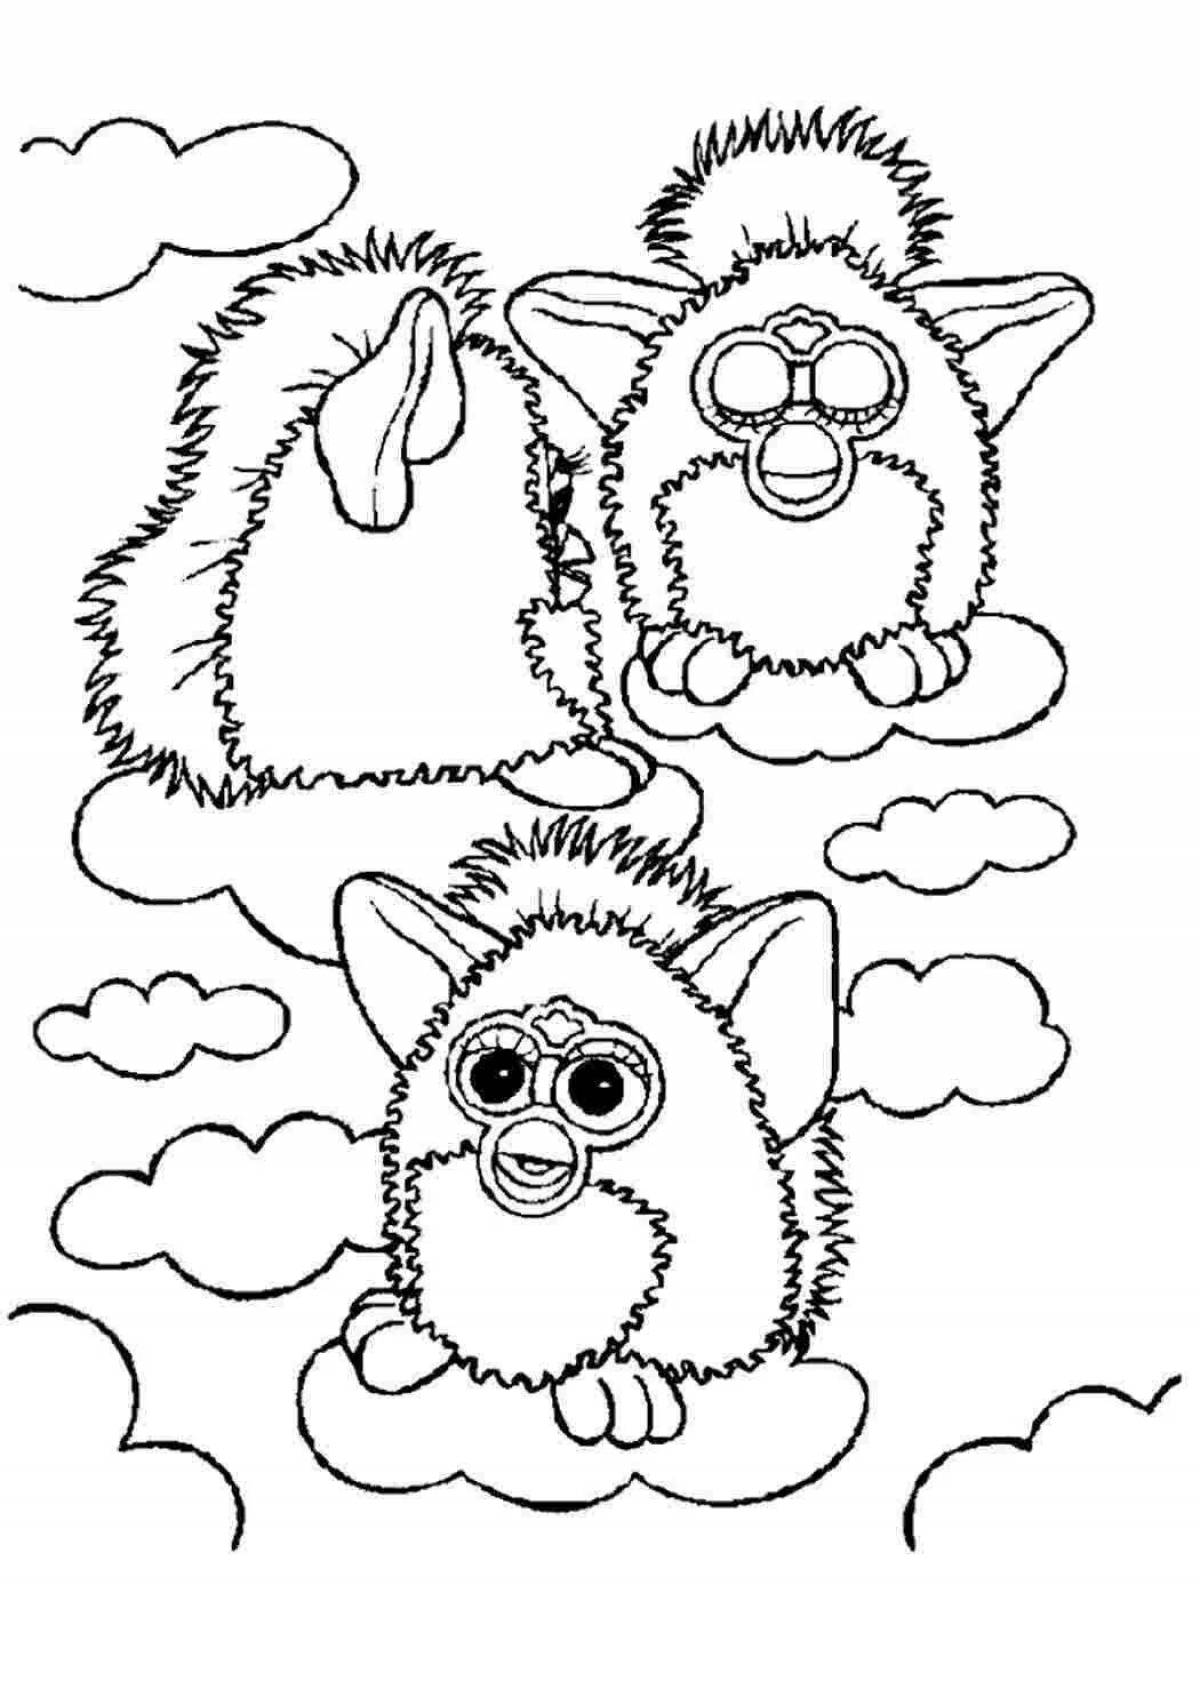 Coloring page dainty furry spy